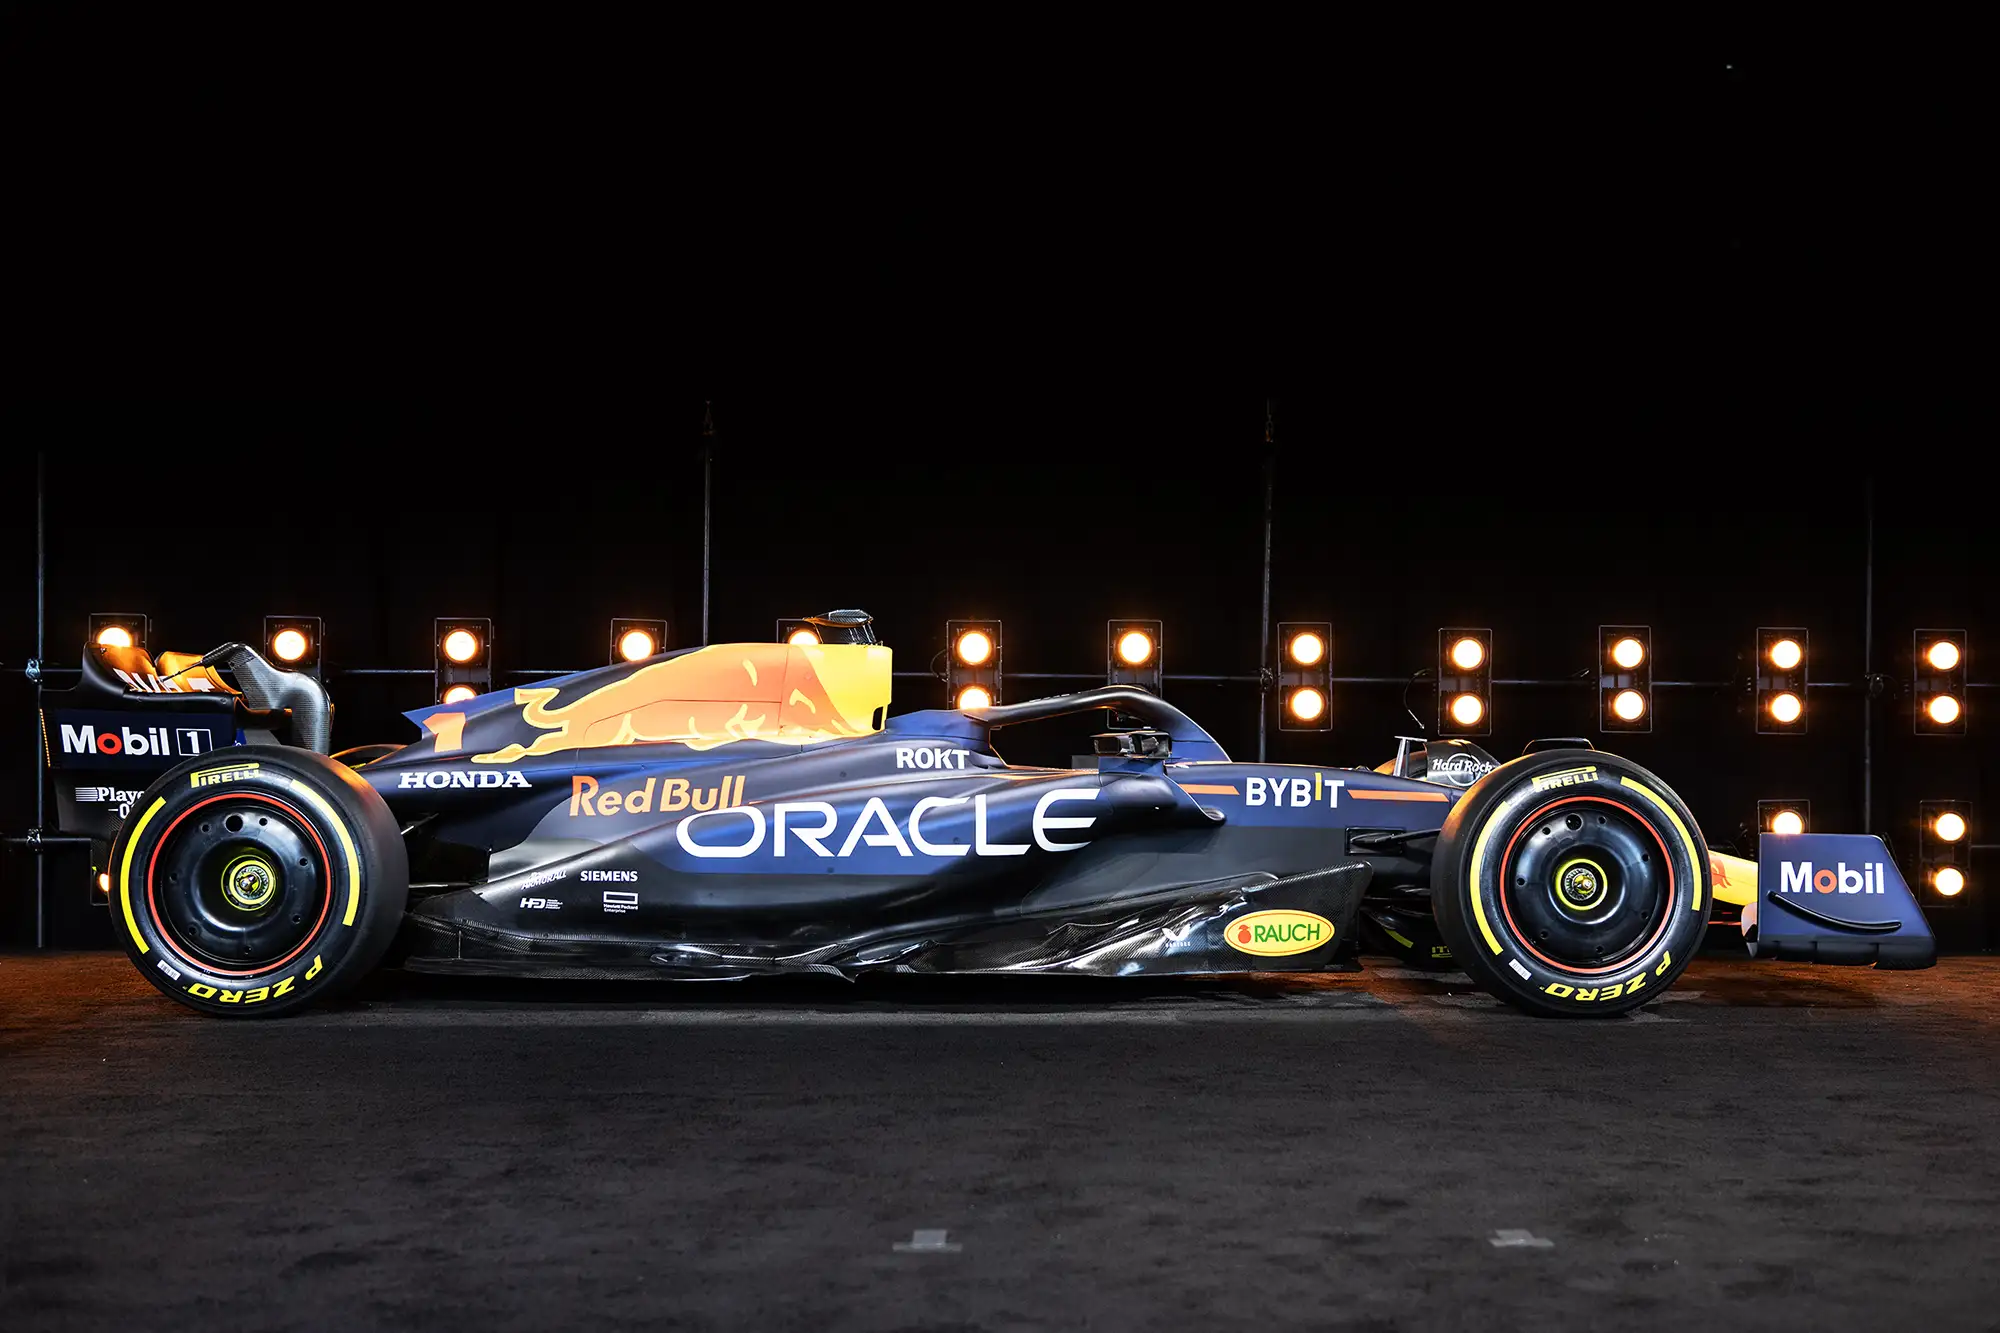 2023 Red Bull Racing RB19 F1 car launch photos